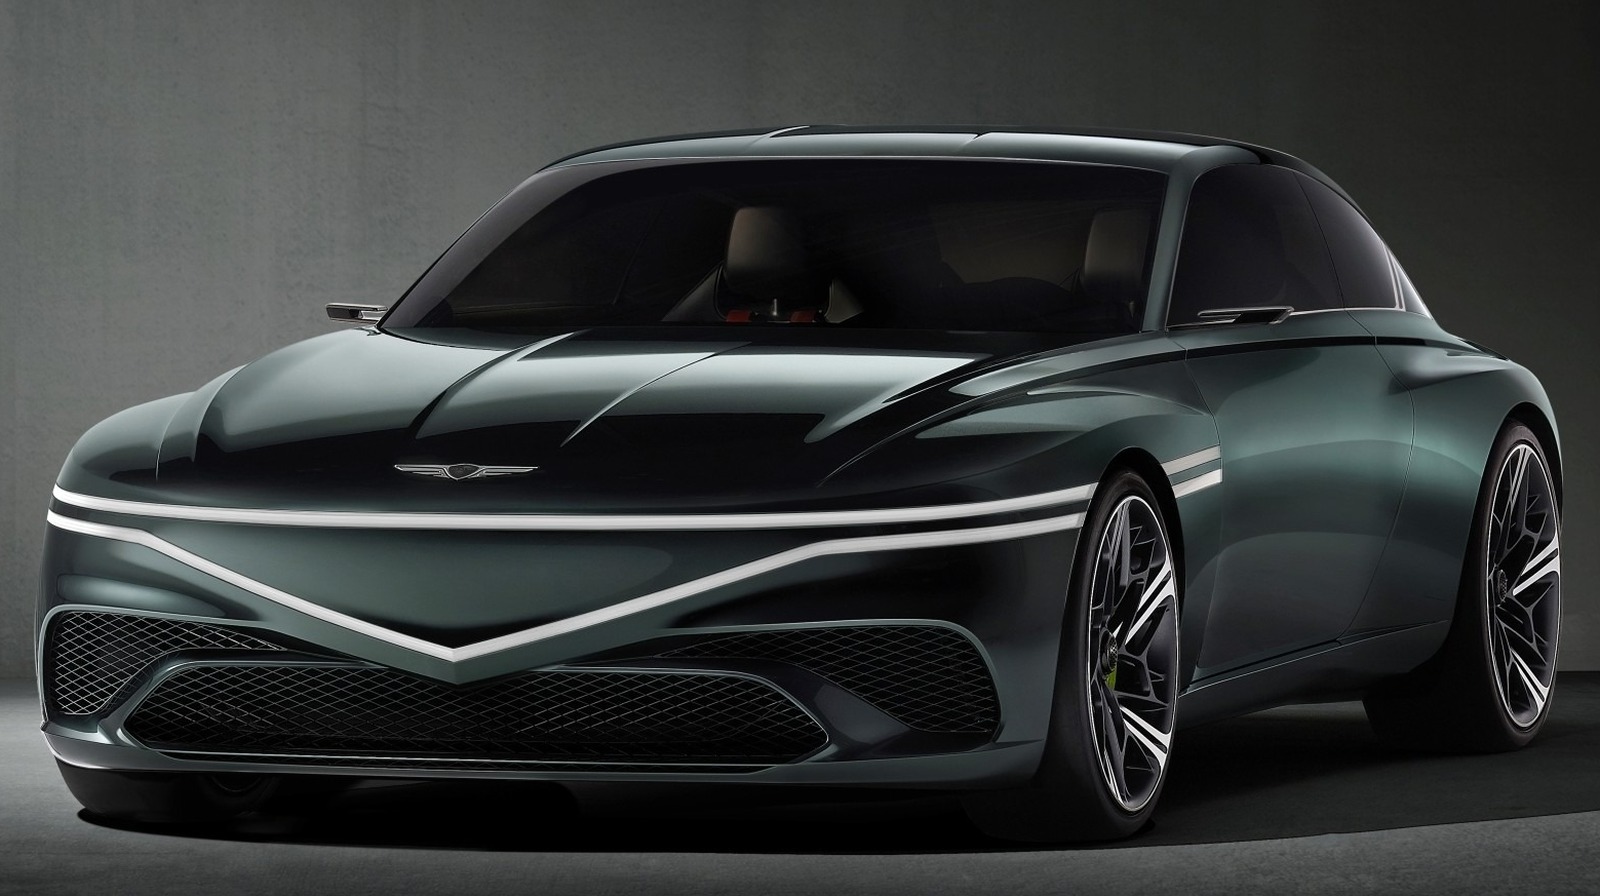 This Incredible Genesis Concept Car Is A Wild Preview Of EVs To Come